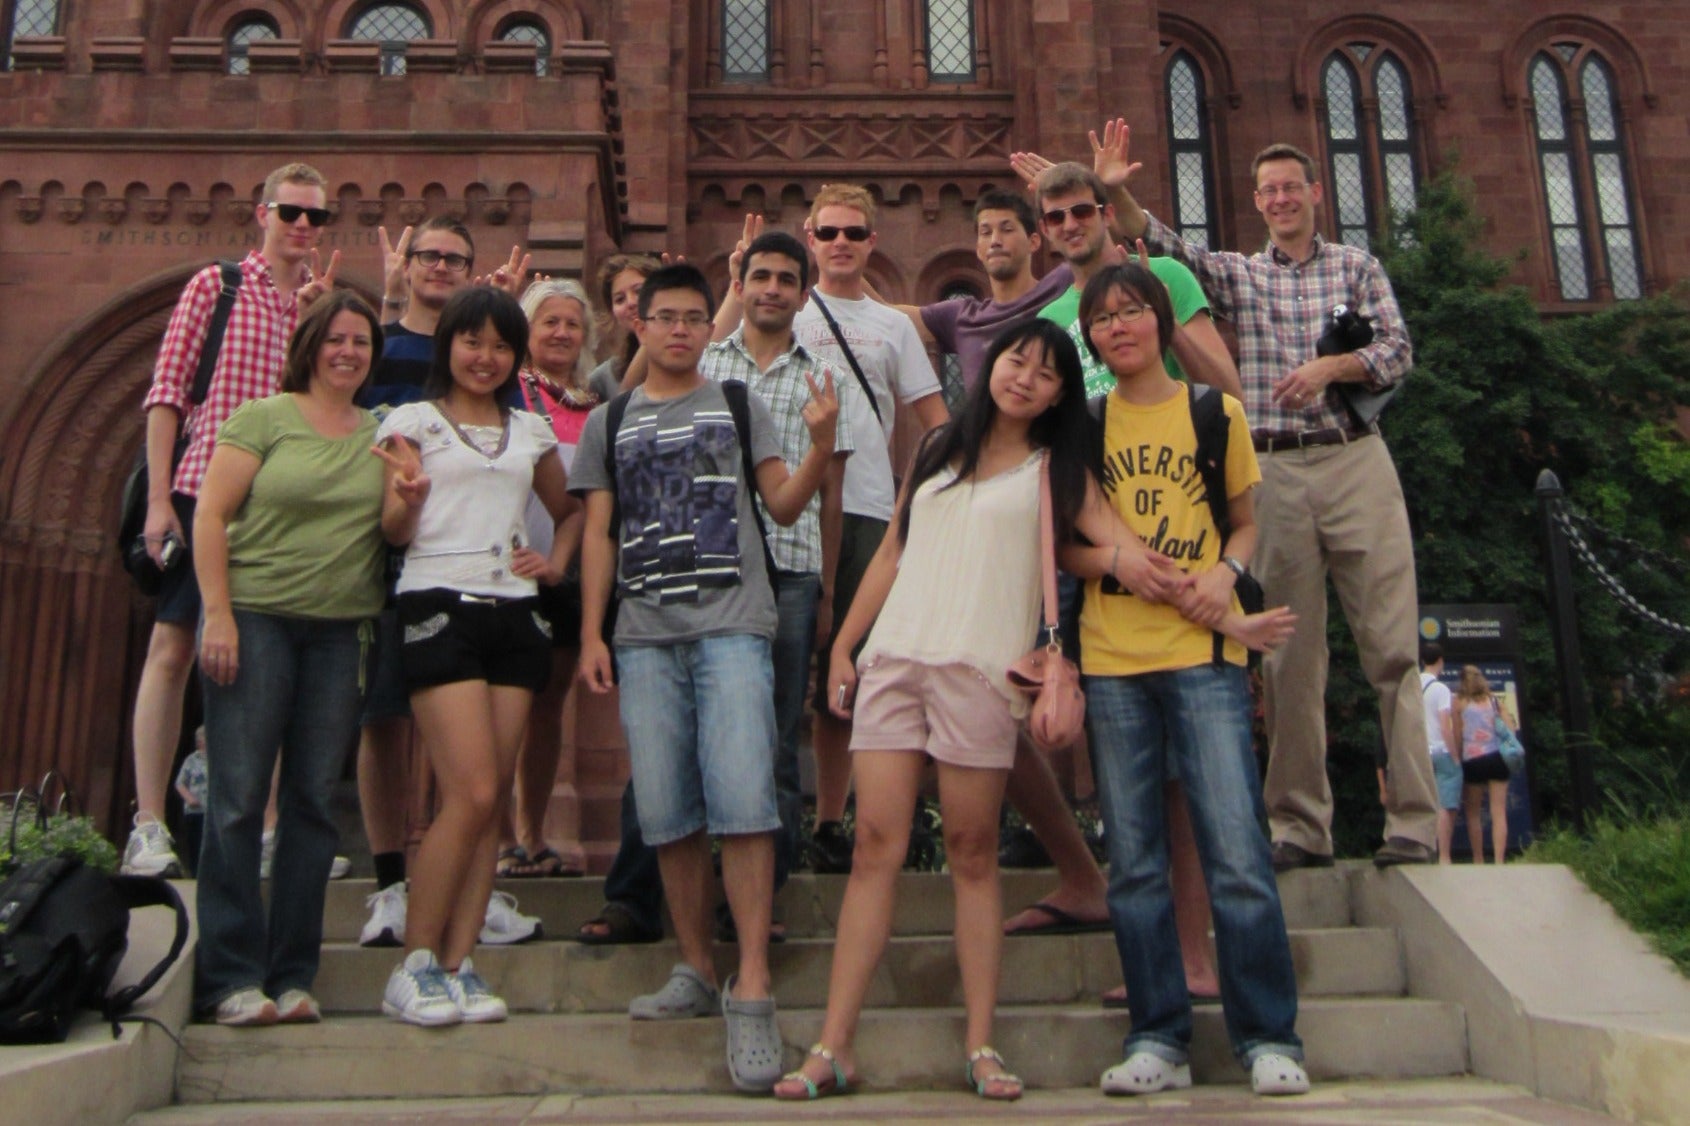 International students pose in front of the Smithsonian.